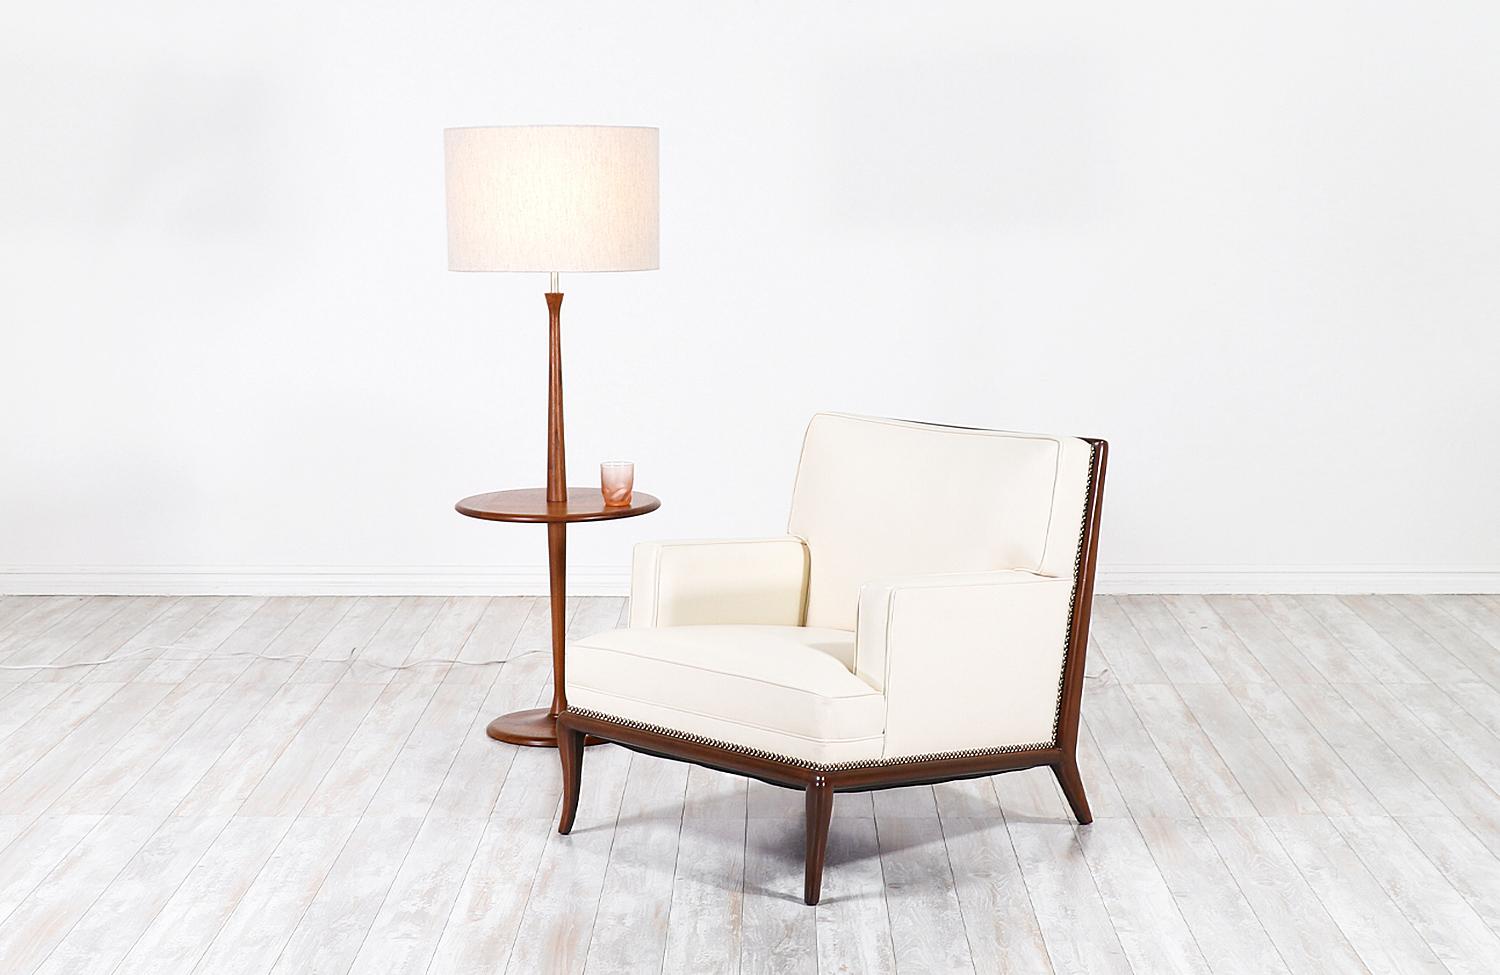 Modern floor lamp designed and manufactured by Laurel Lamp Co. in the United States, circa 1960s. This sleek, Minimalist design features a tall walnut wood body with a circular slate table surface and a weighted base that gives stability and style